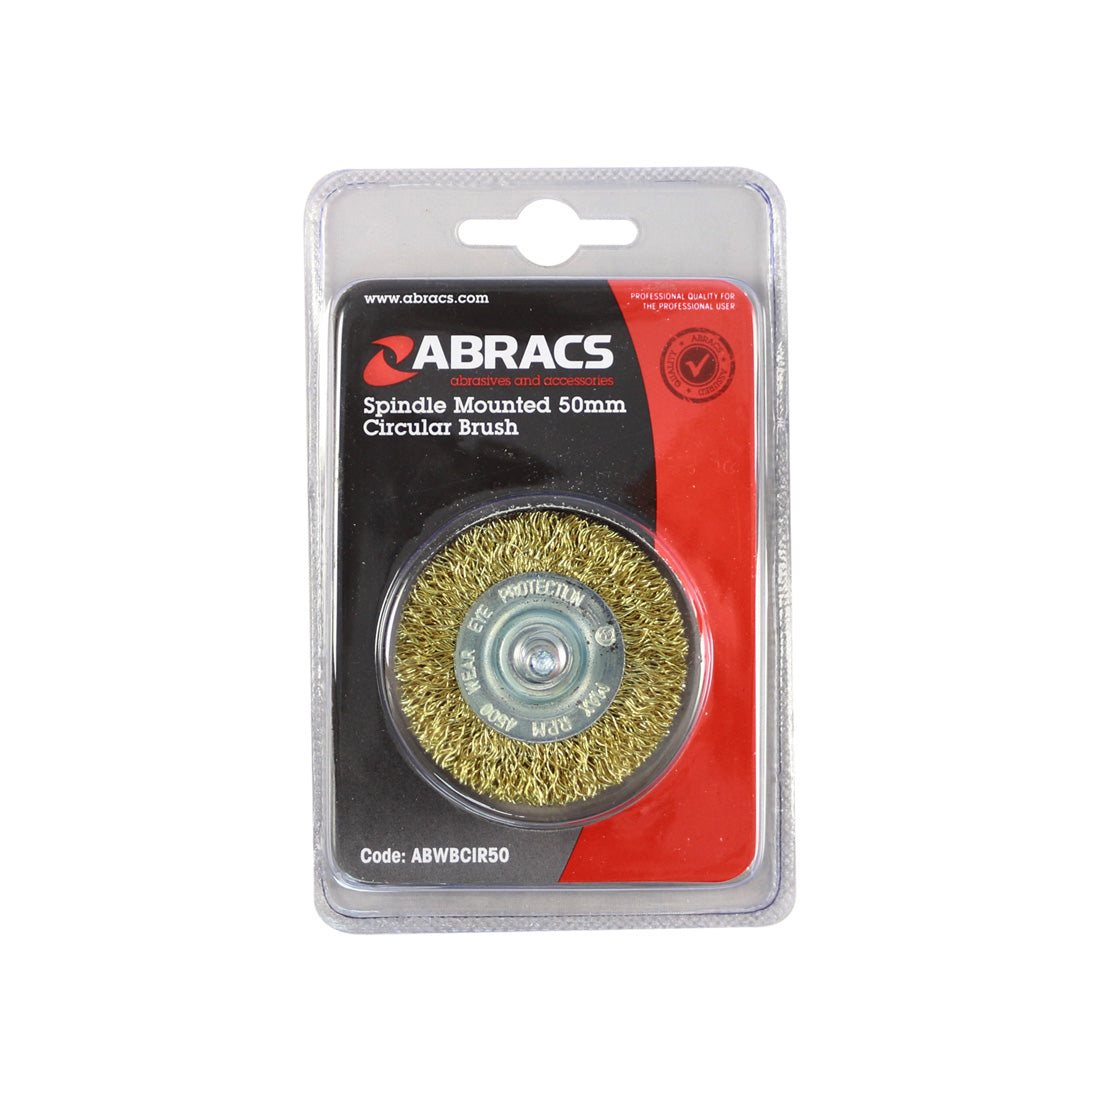 Abracs Spindle Mounted Circular Wire Brush Brass Dipped Steel - 50mm